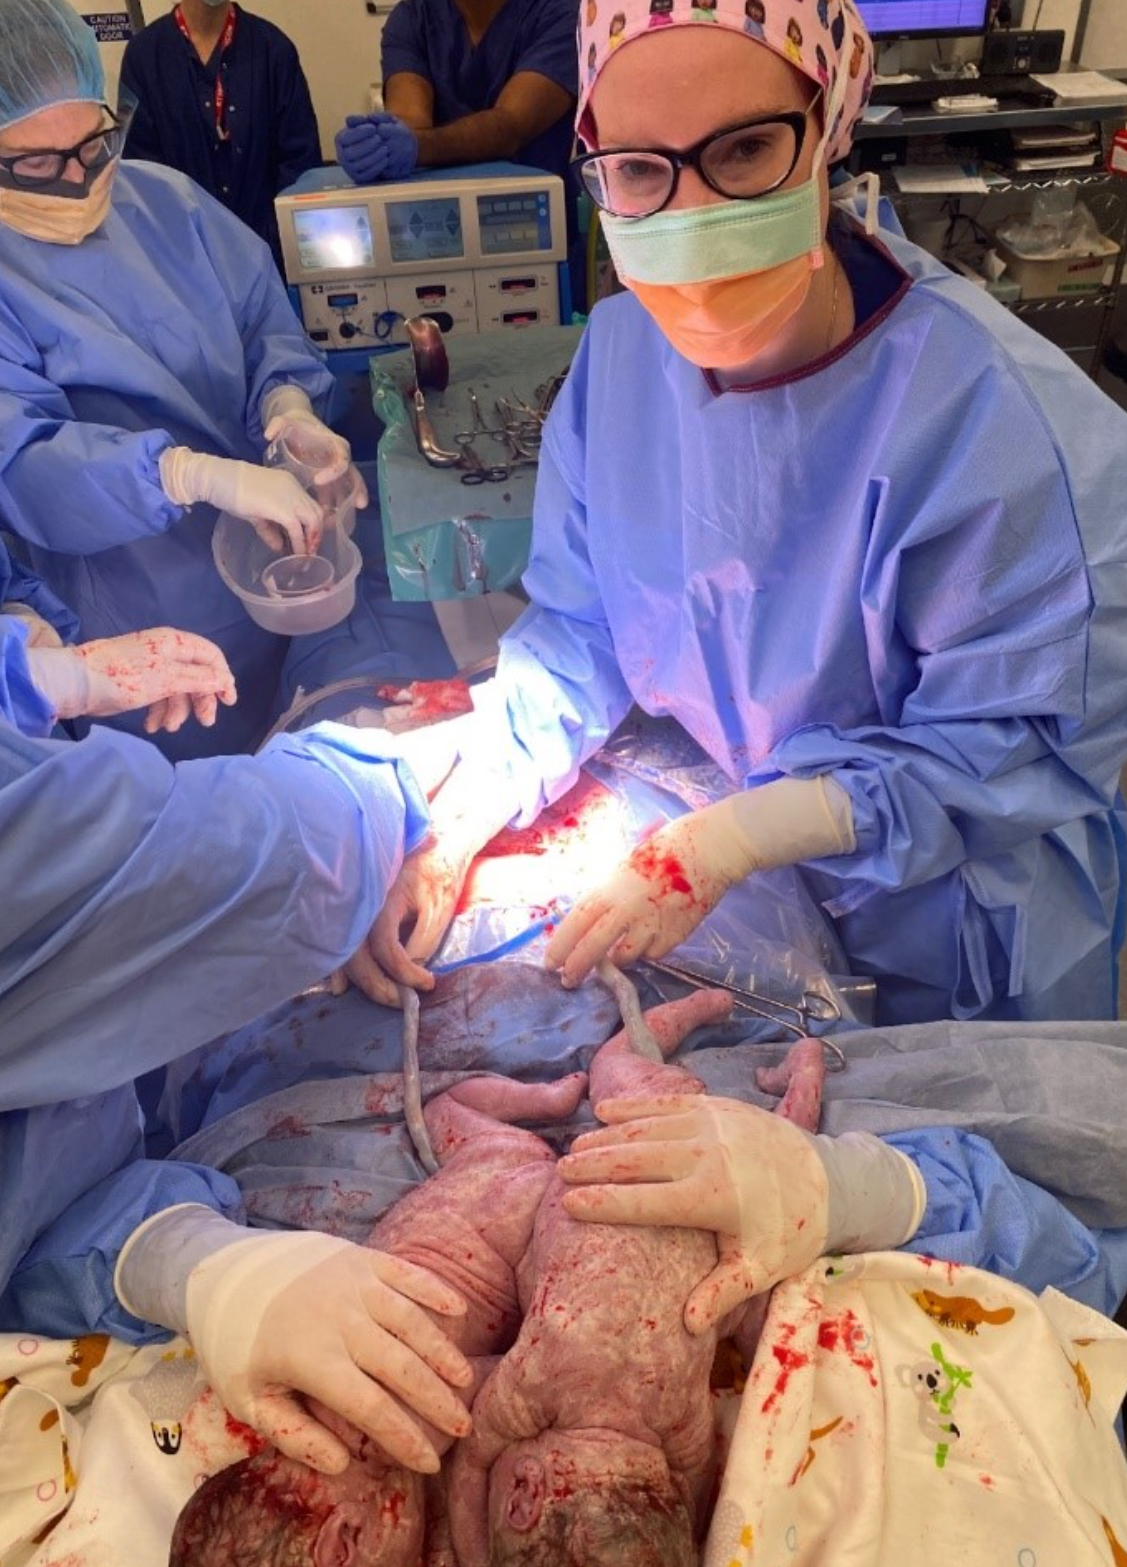 Suzanne Meharry with Tina Blacklock (out of the picture) and her baby twins during a maternally assisted caesarean.